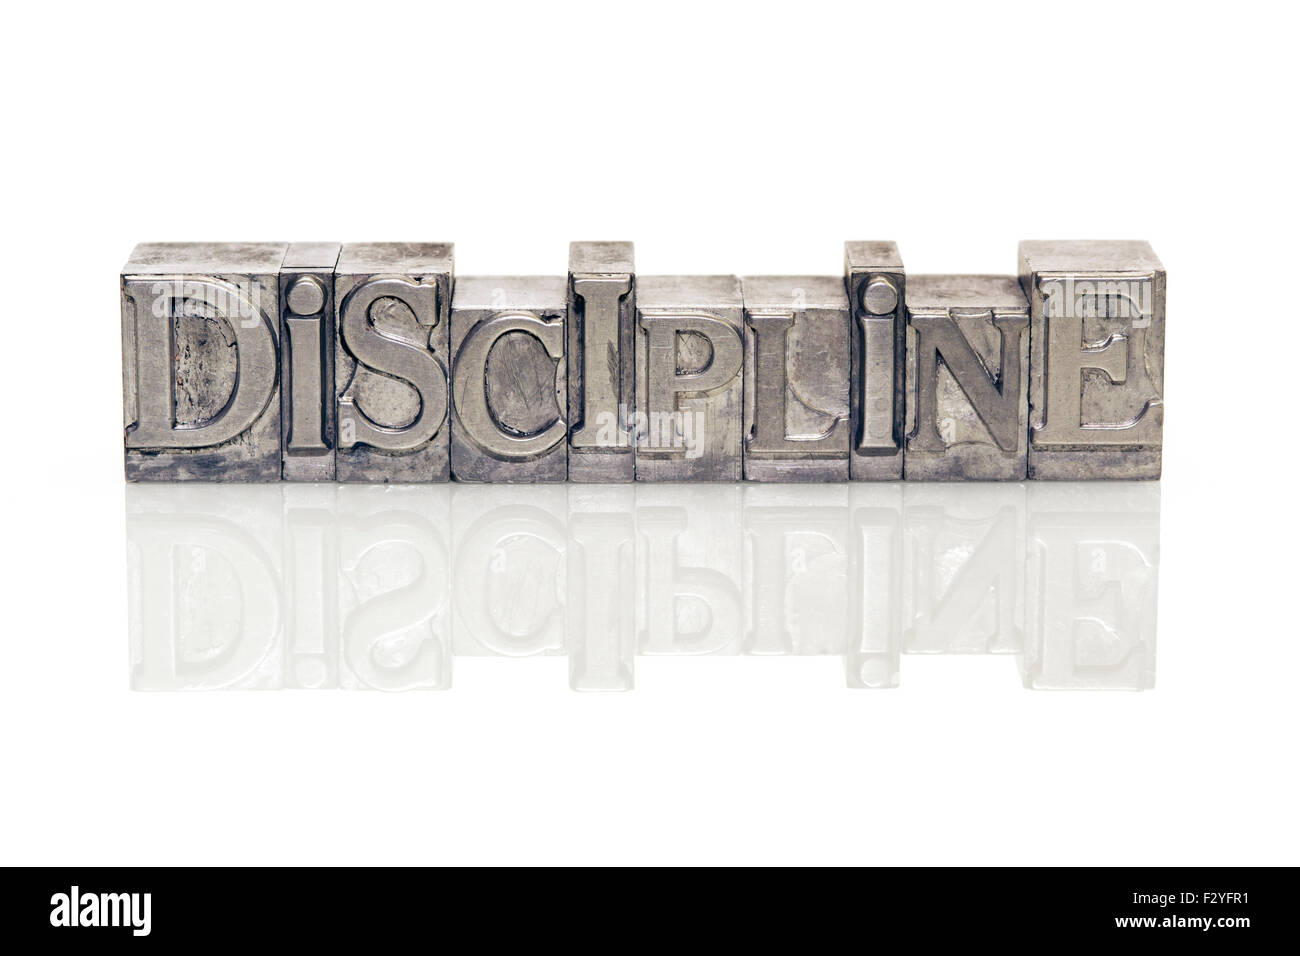 discipline word made from metallic letterpress type on reflective surface Stock Photo